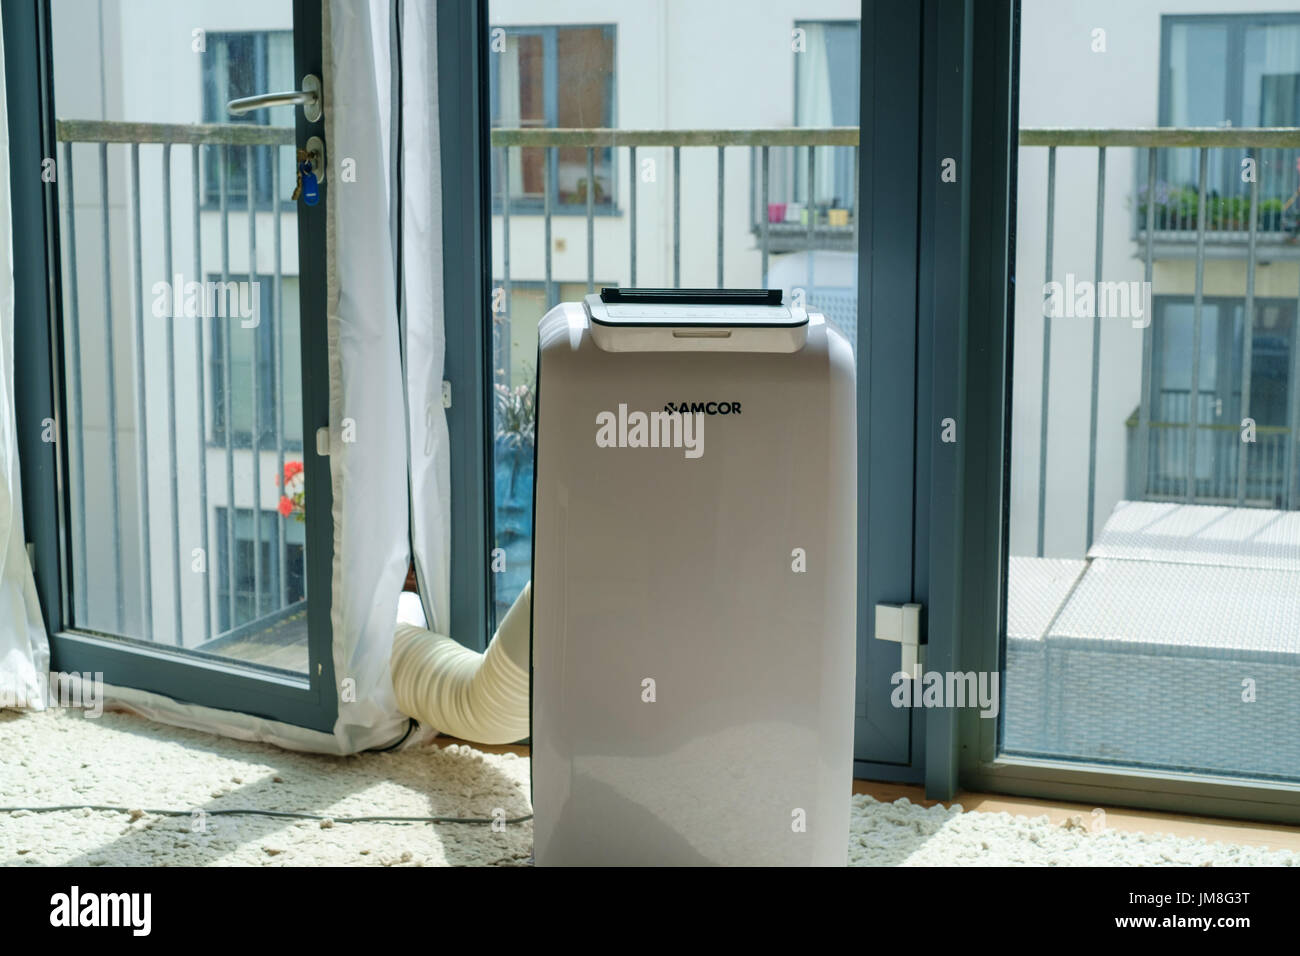 Portable air conditioning unit vented onto balcony in city flat in London Stock Photo